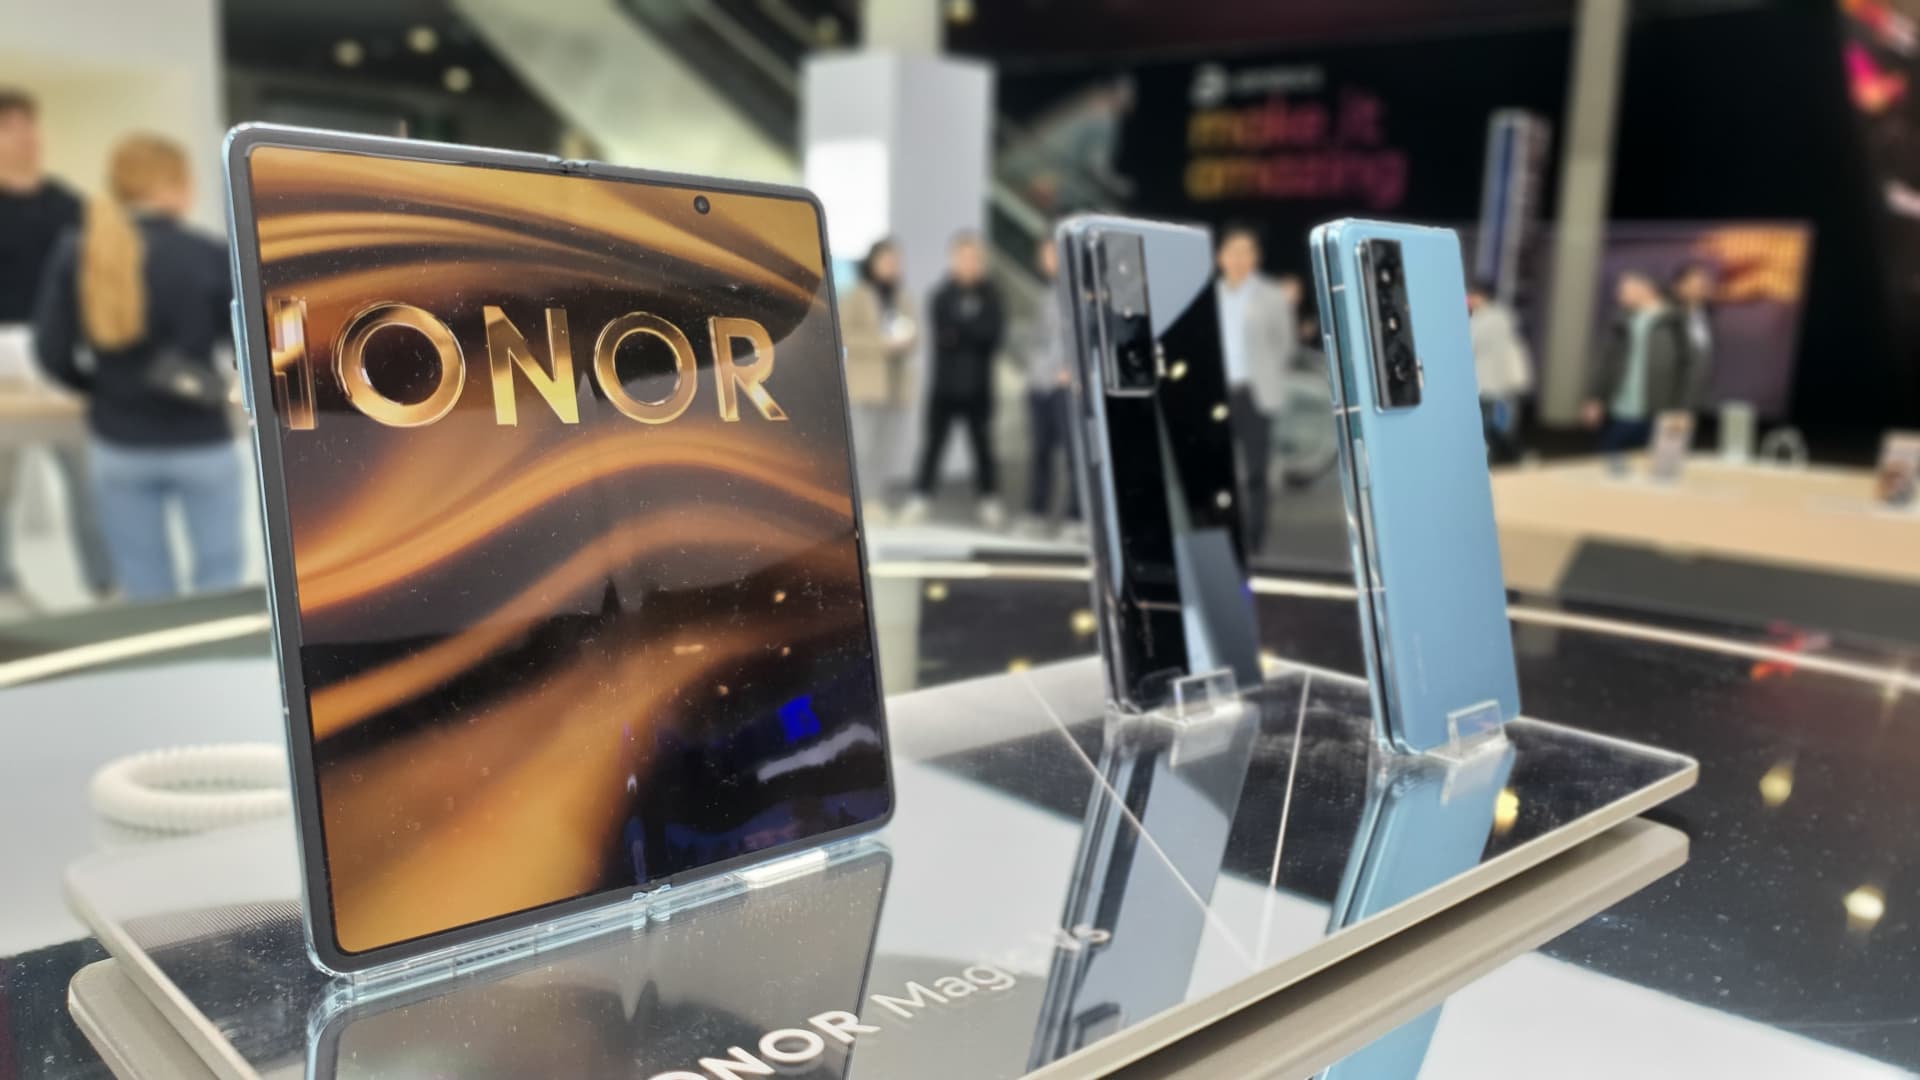 As Apple rumors swirl, Chinese rivals launch foldable smartphones to challenge Samsung